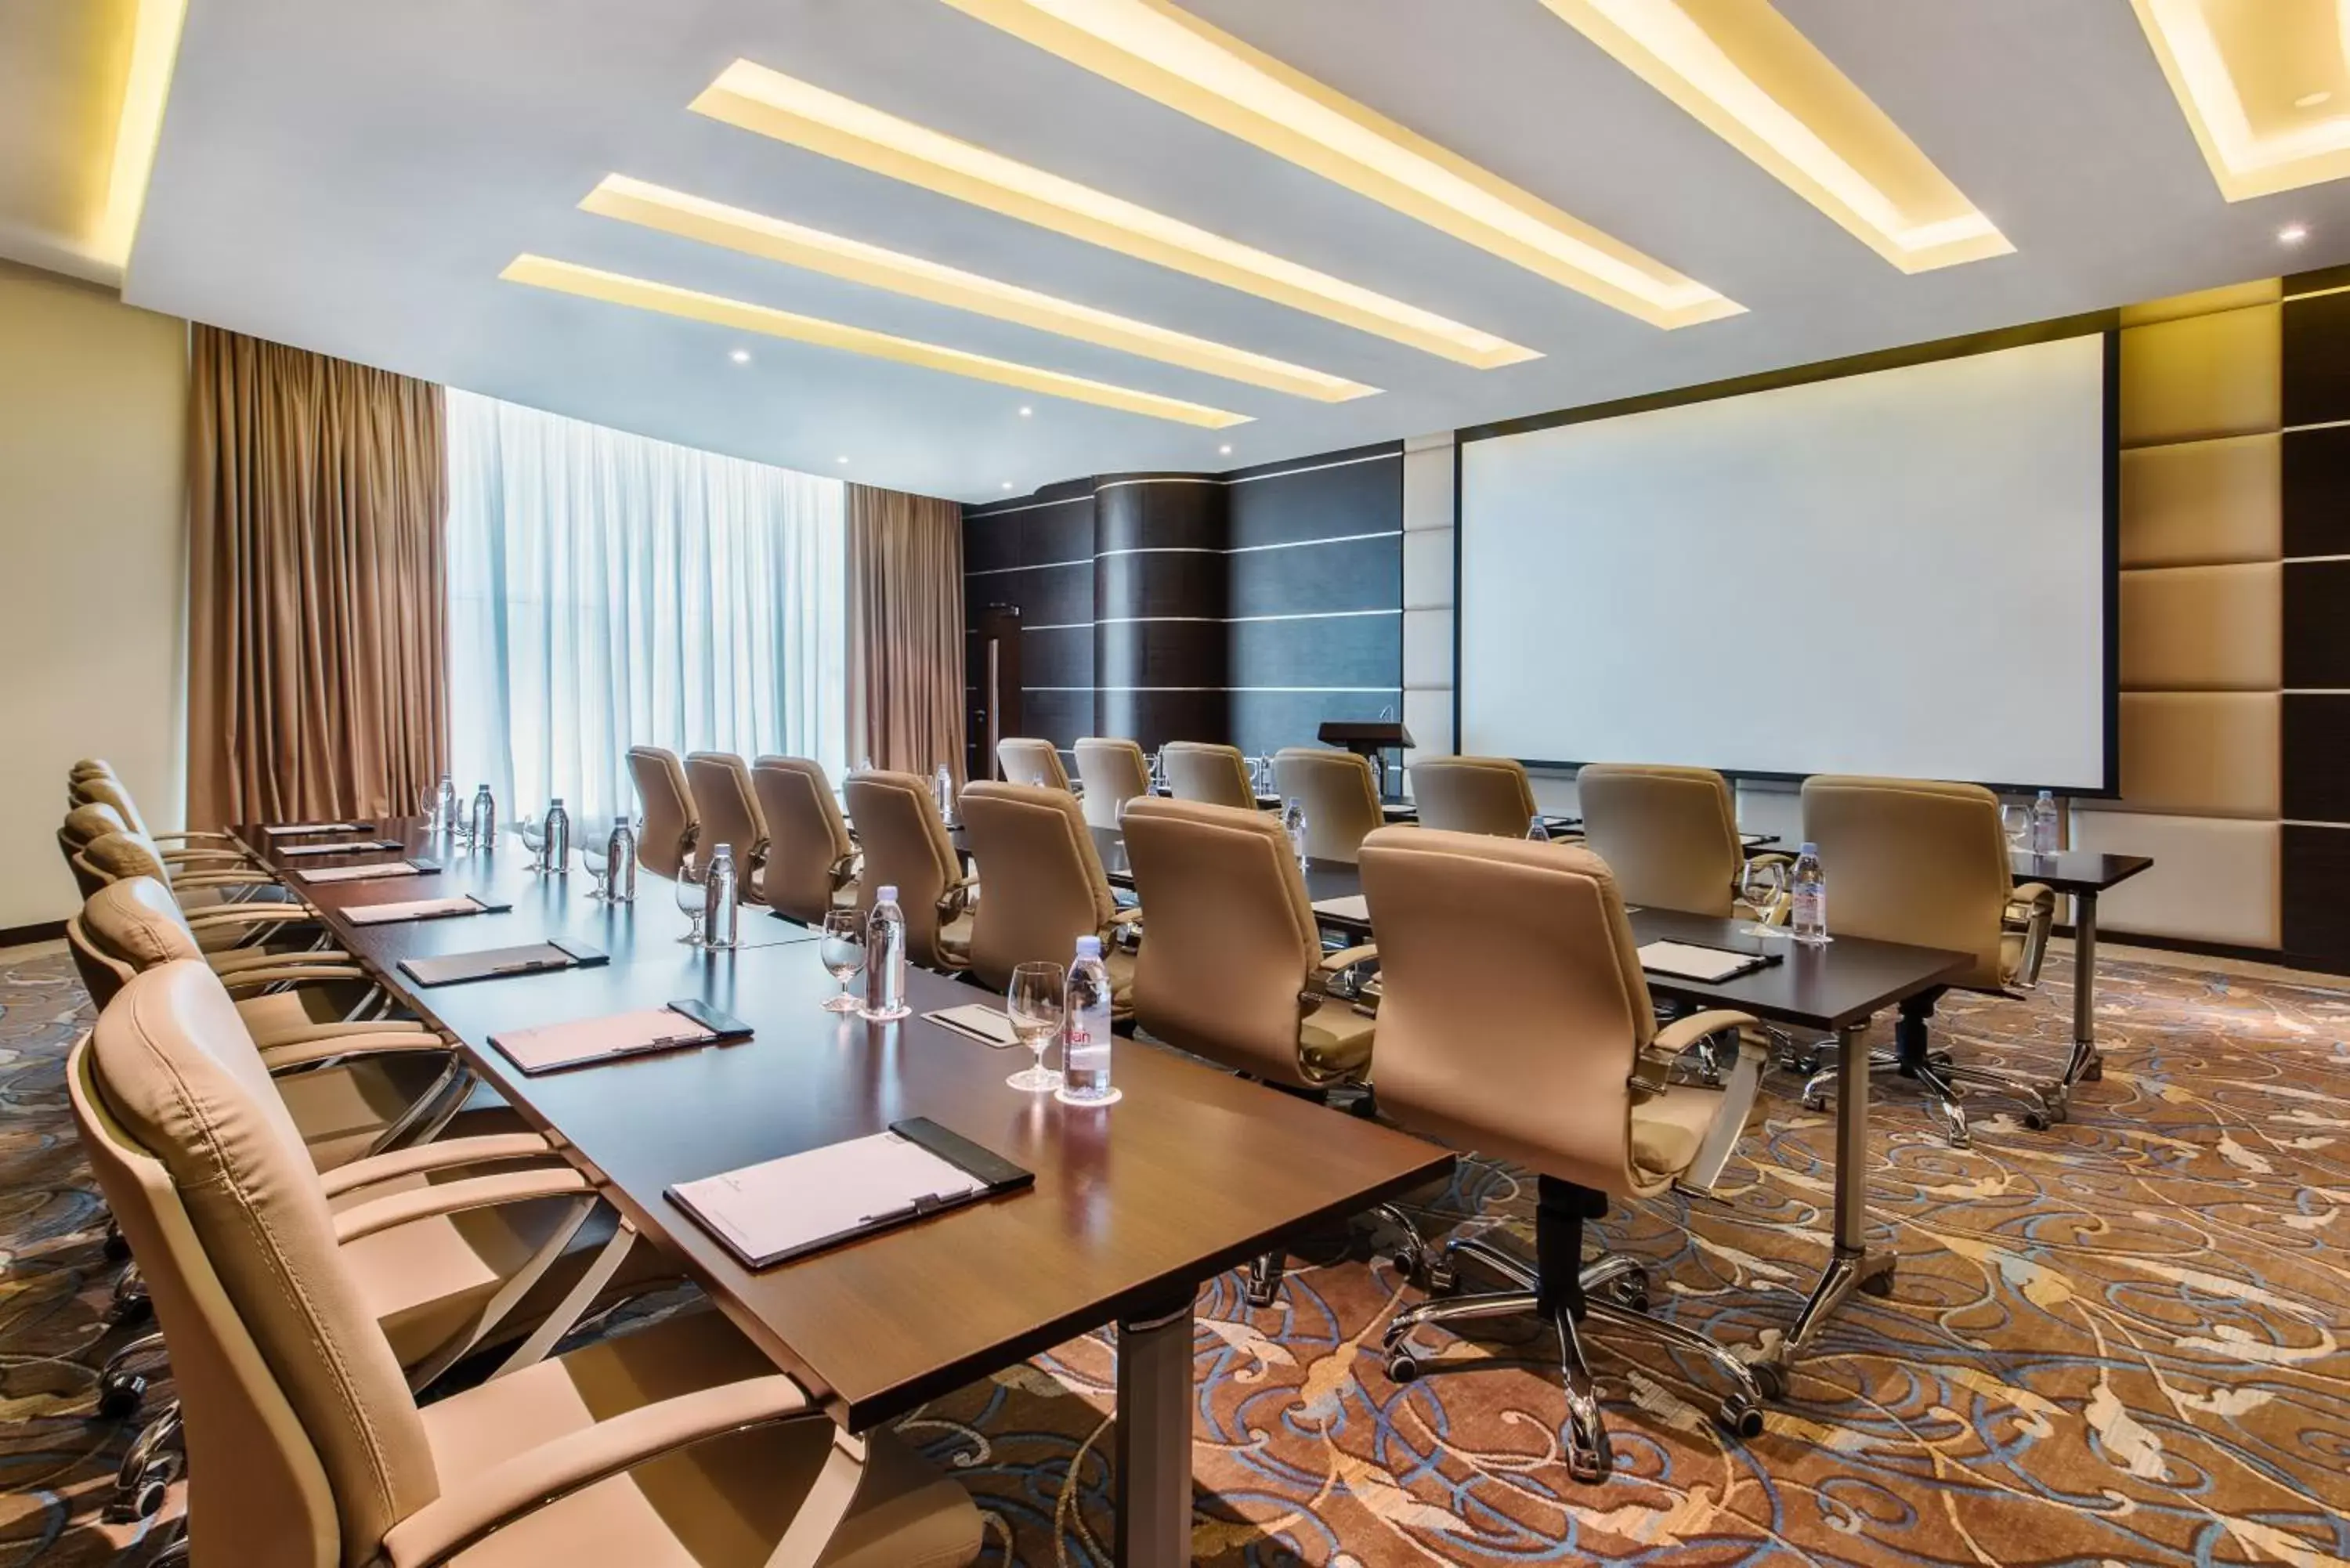 Meeting/conference room in Golden Tulip Doha Hotel